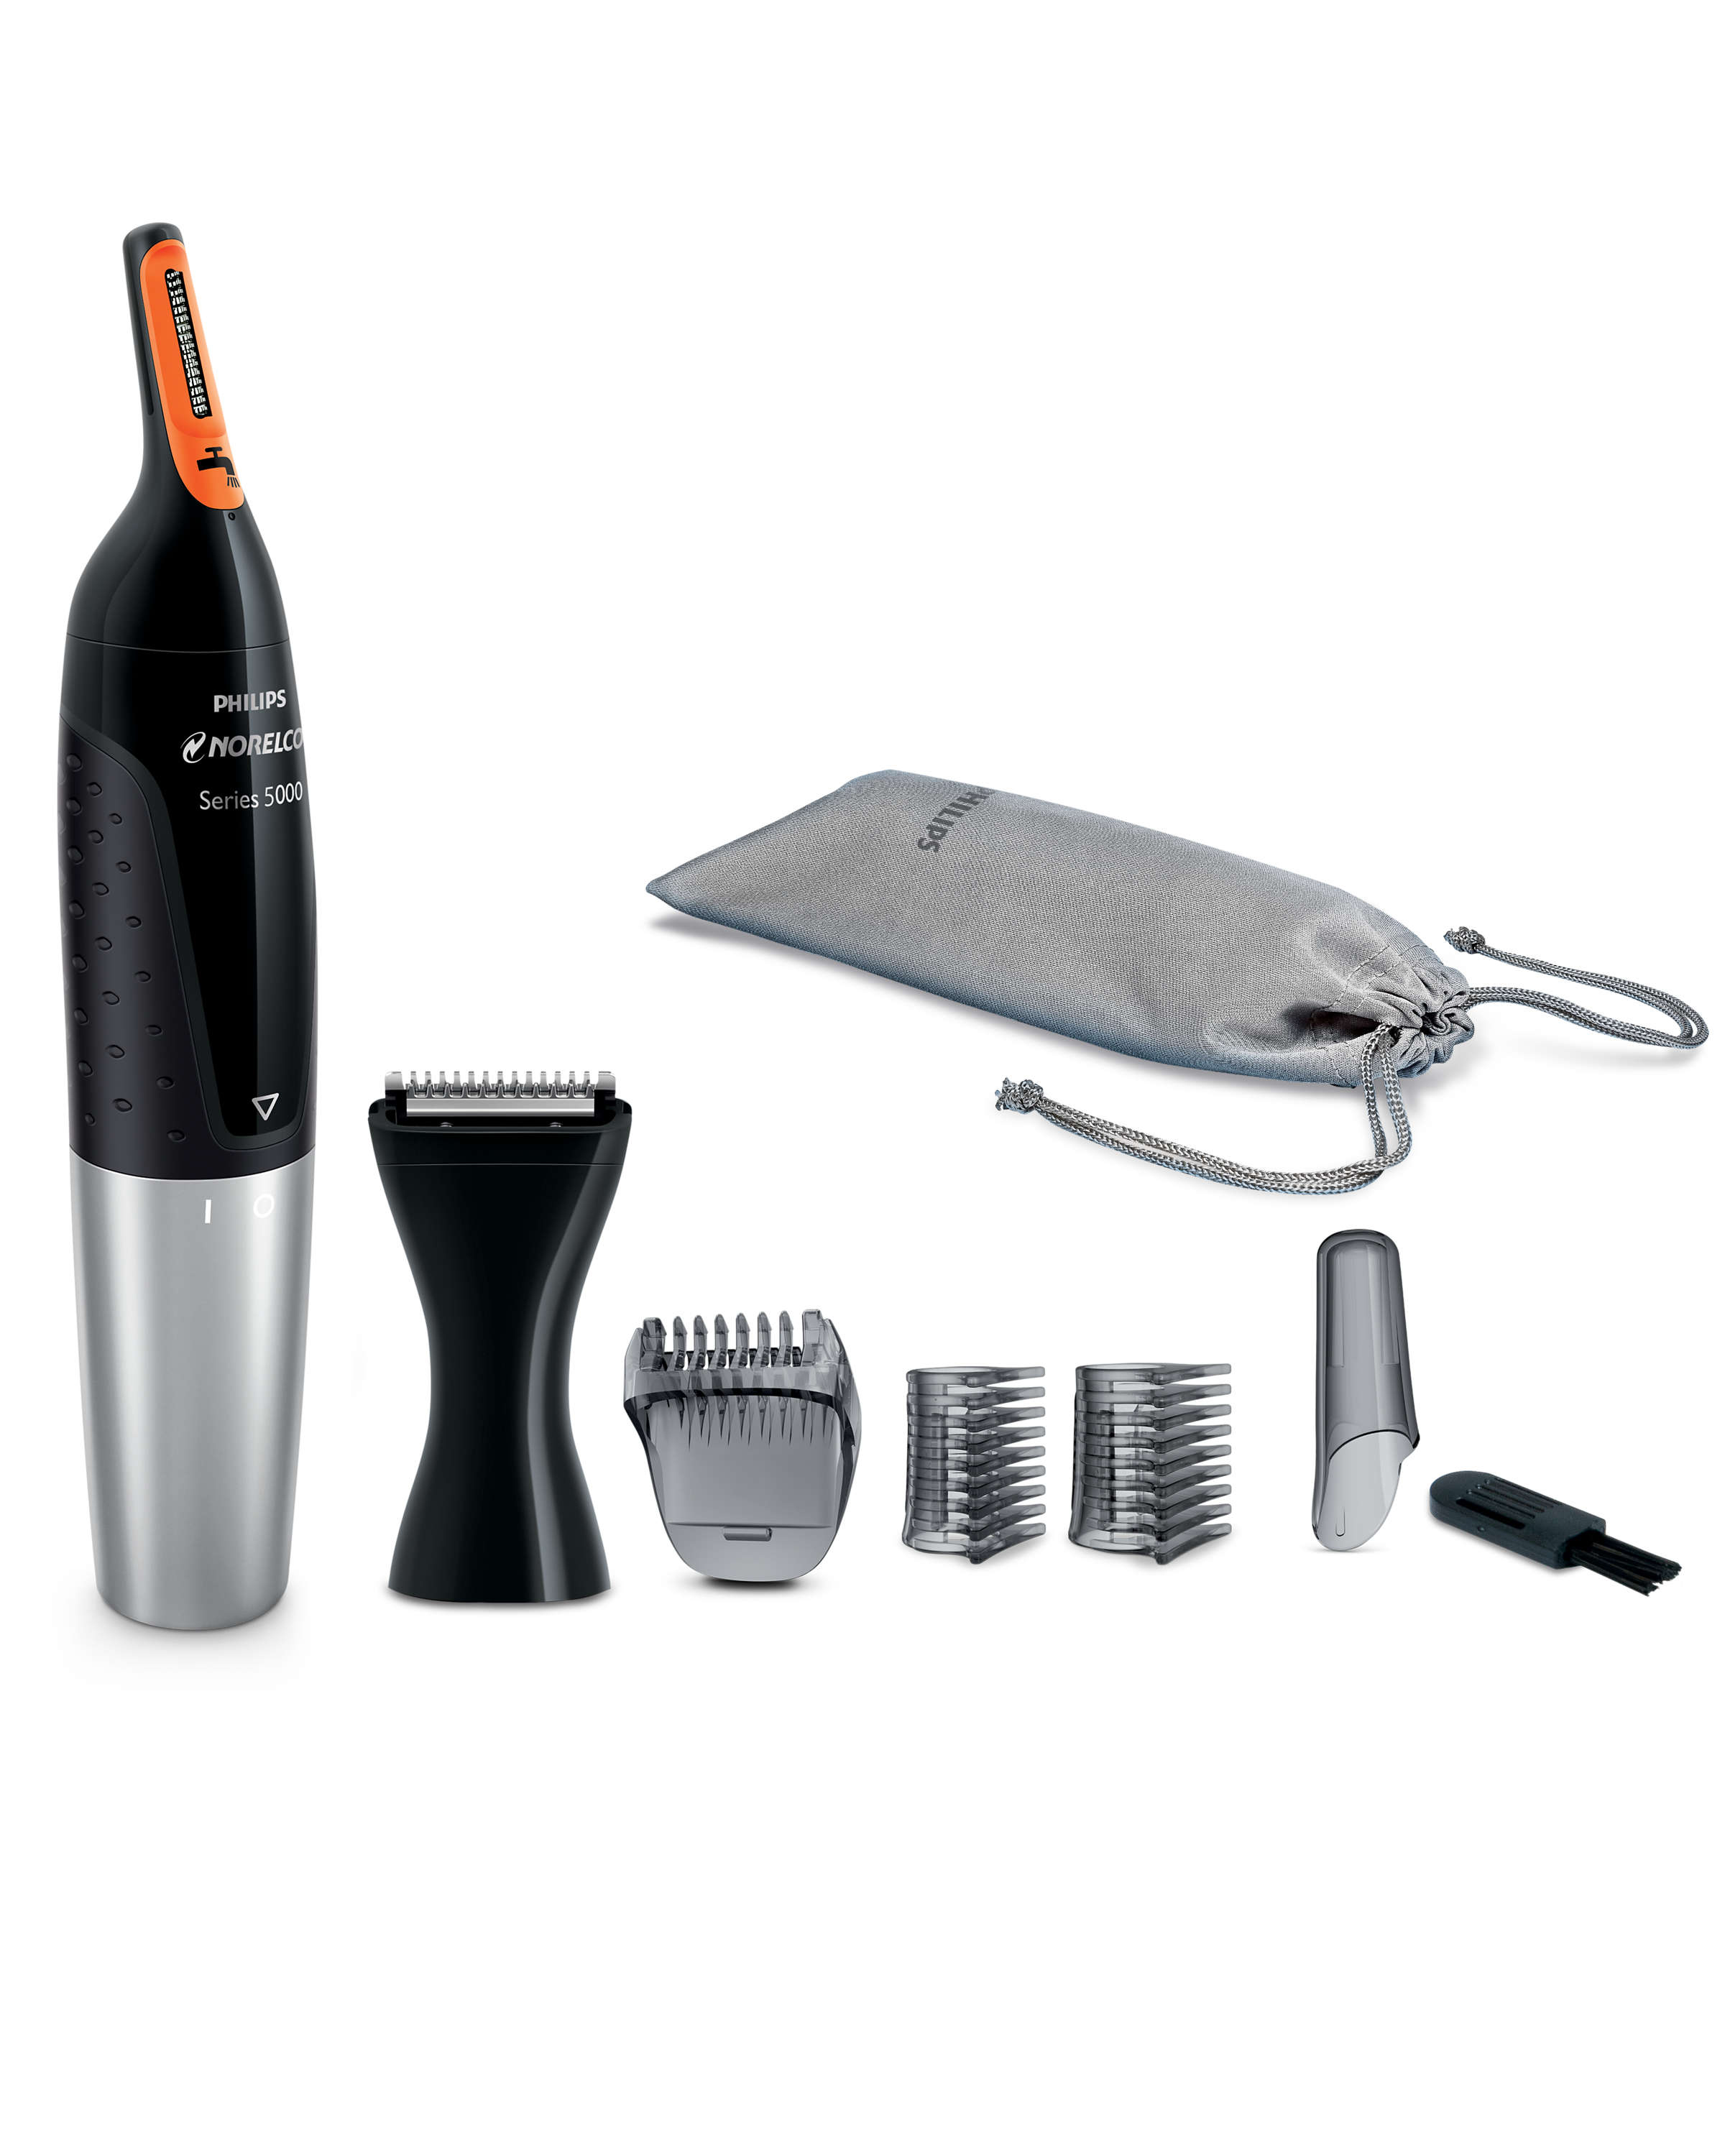 Philips Norelco Series 5000 Nosetrimmer 5100, Nose, Eyebrow and Ear Trimmer, NT5175/49 - image 2 of 2